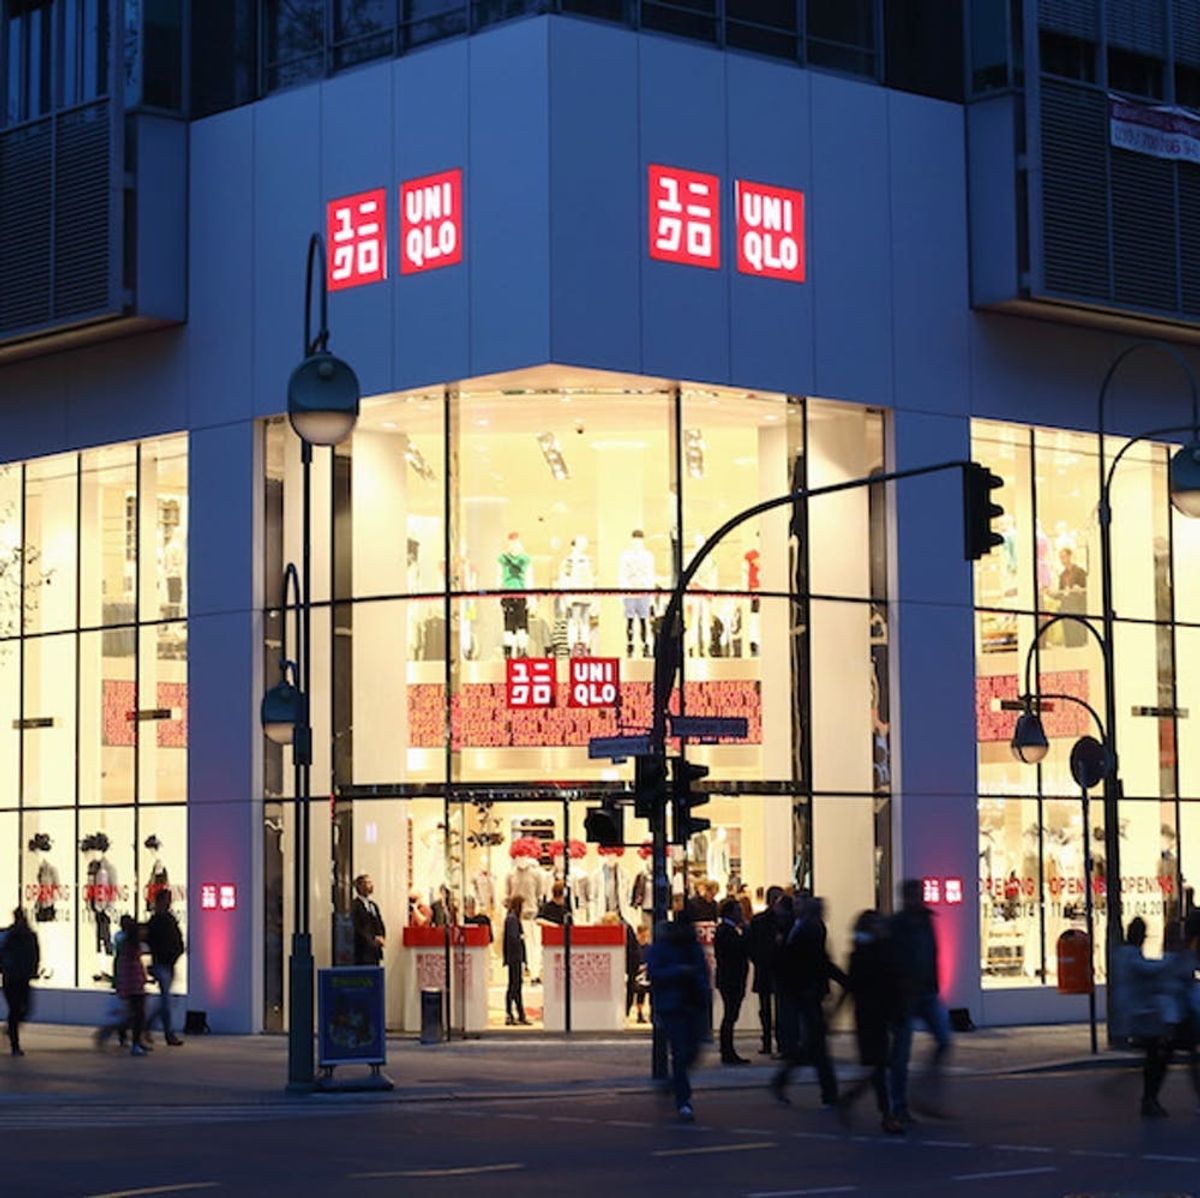 How Uniqlo Is Giving Their Employees 4-Day Workweeks